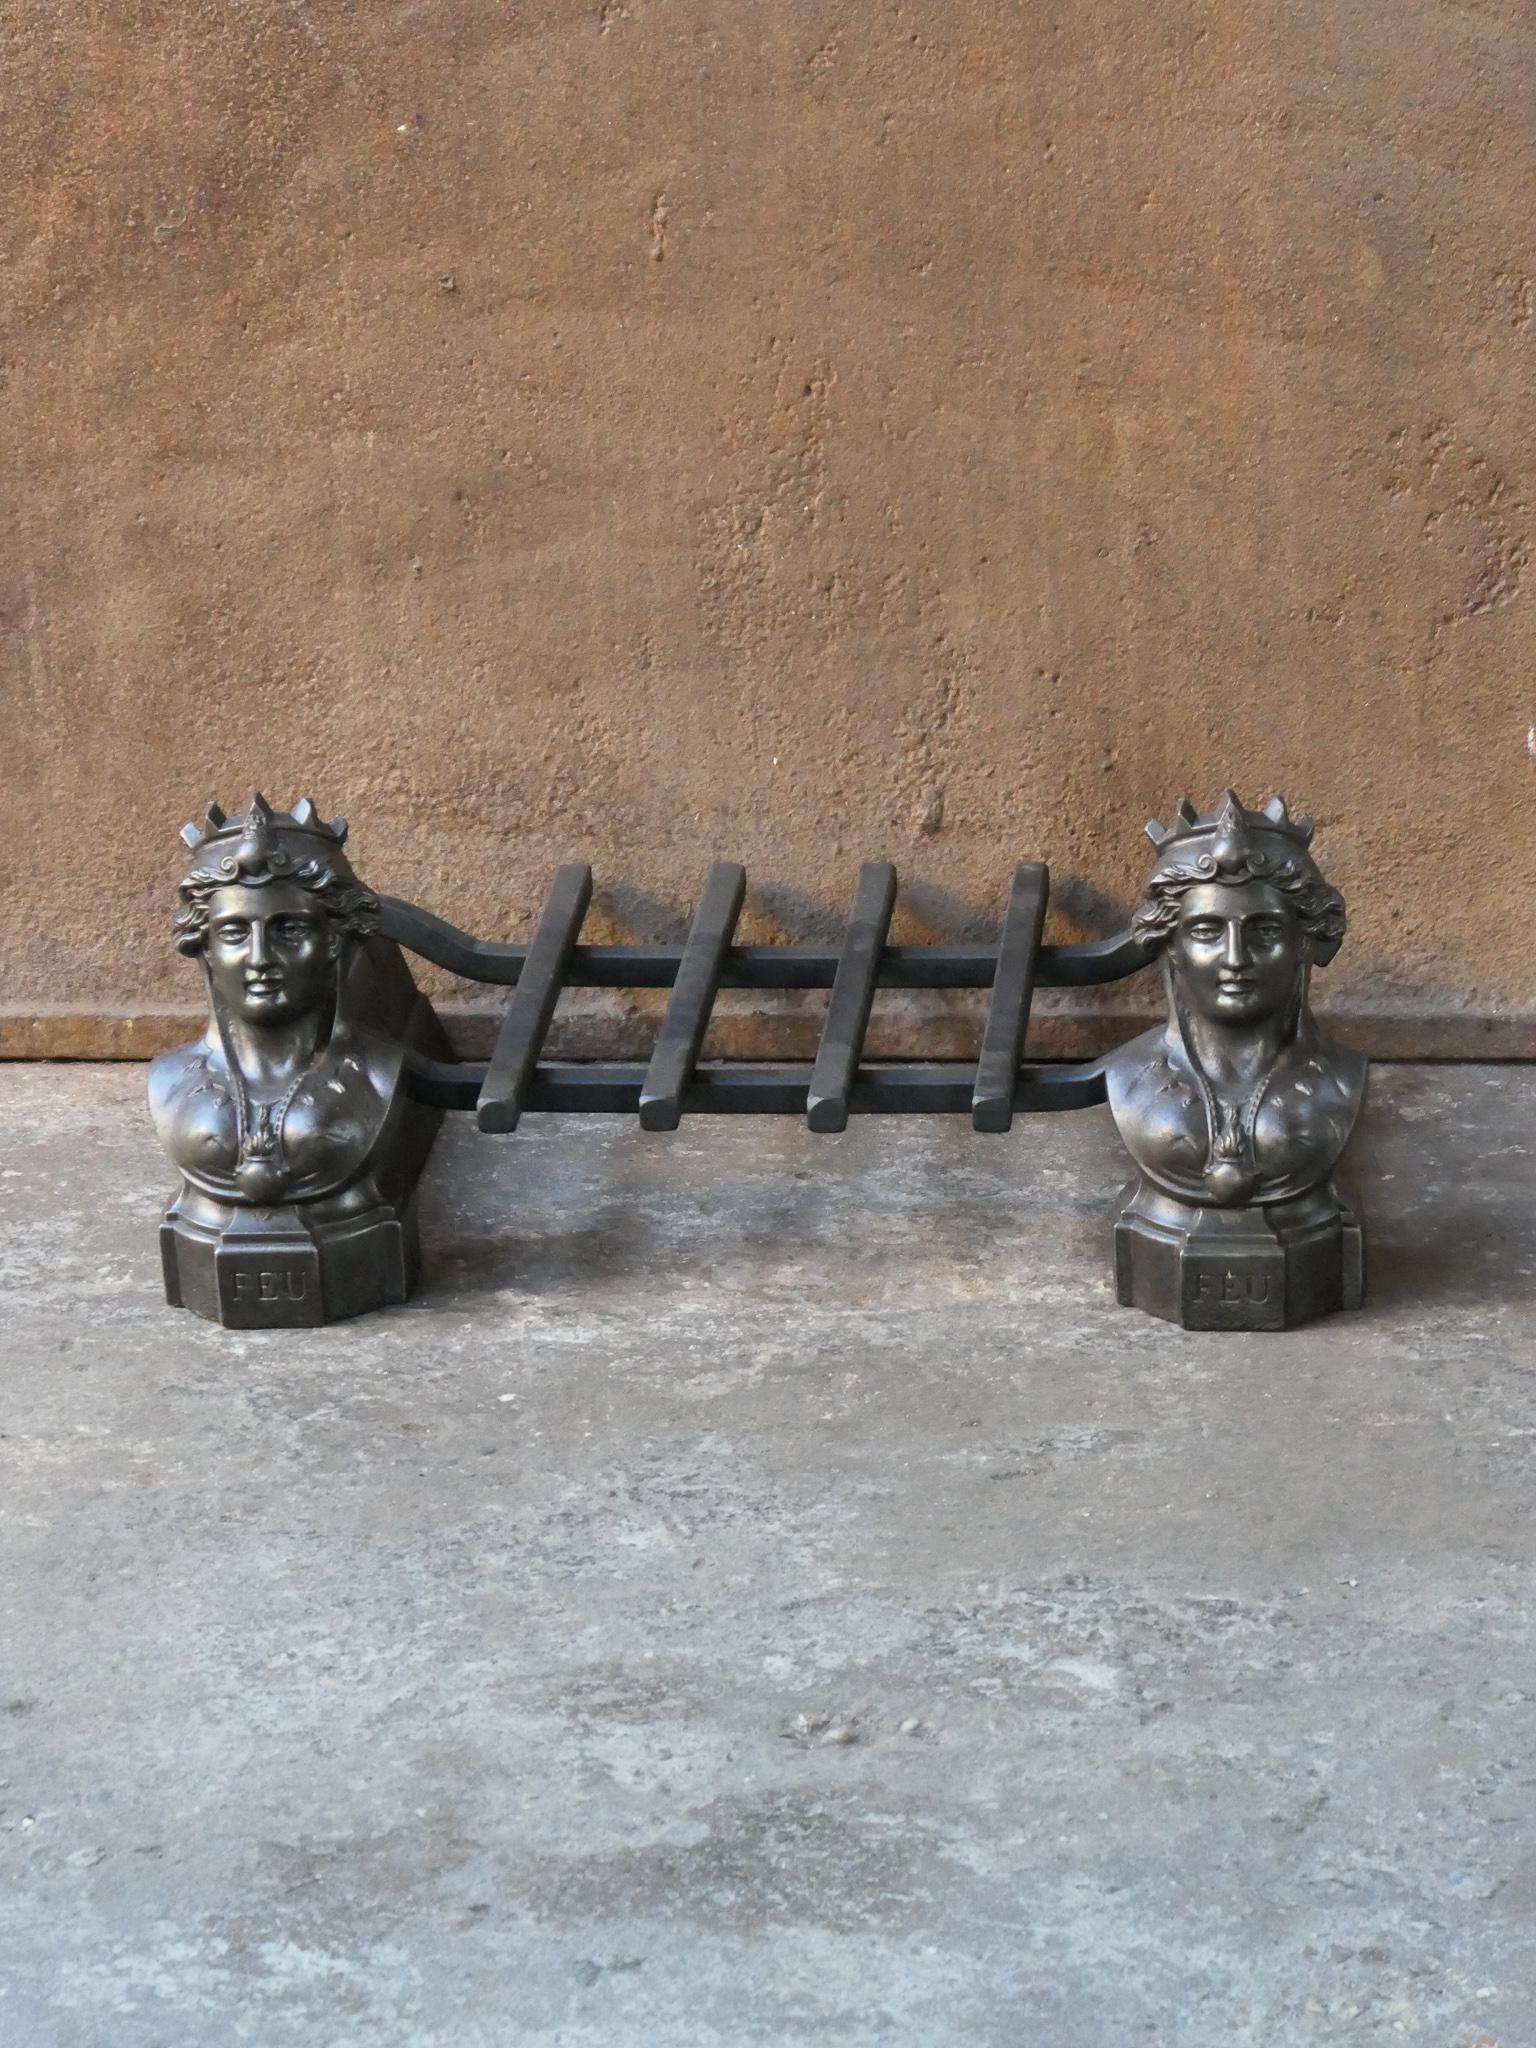 19th century French Napoleon III period fireplace basket with period andirons and new grate. The fire basket is made of cast iron and wrought iron. The basket is in a good condition and is fully functional.